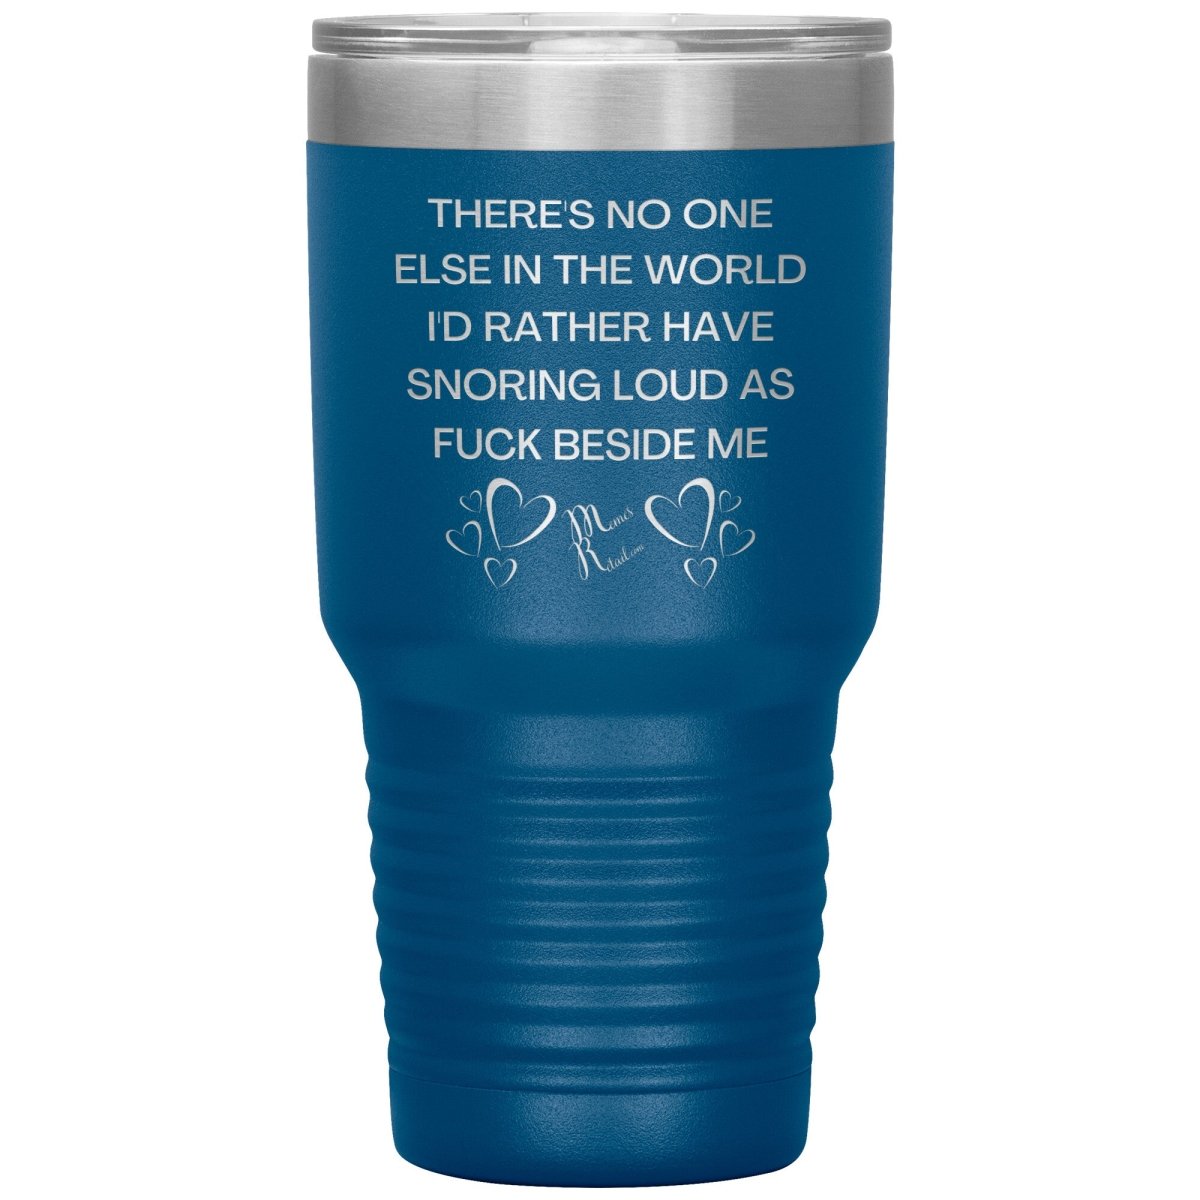 There's No One Else in the World I'd Rather Have Snoring Loud, 30oz Insulated Tumbler / Blue - MemesRetail.com